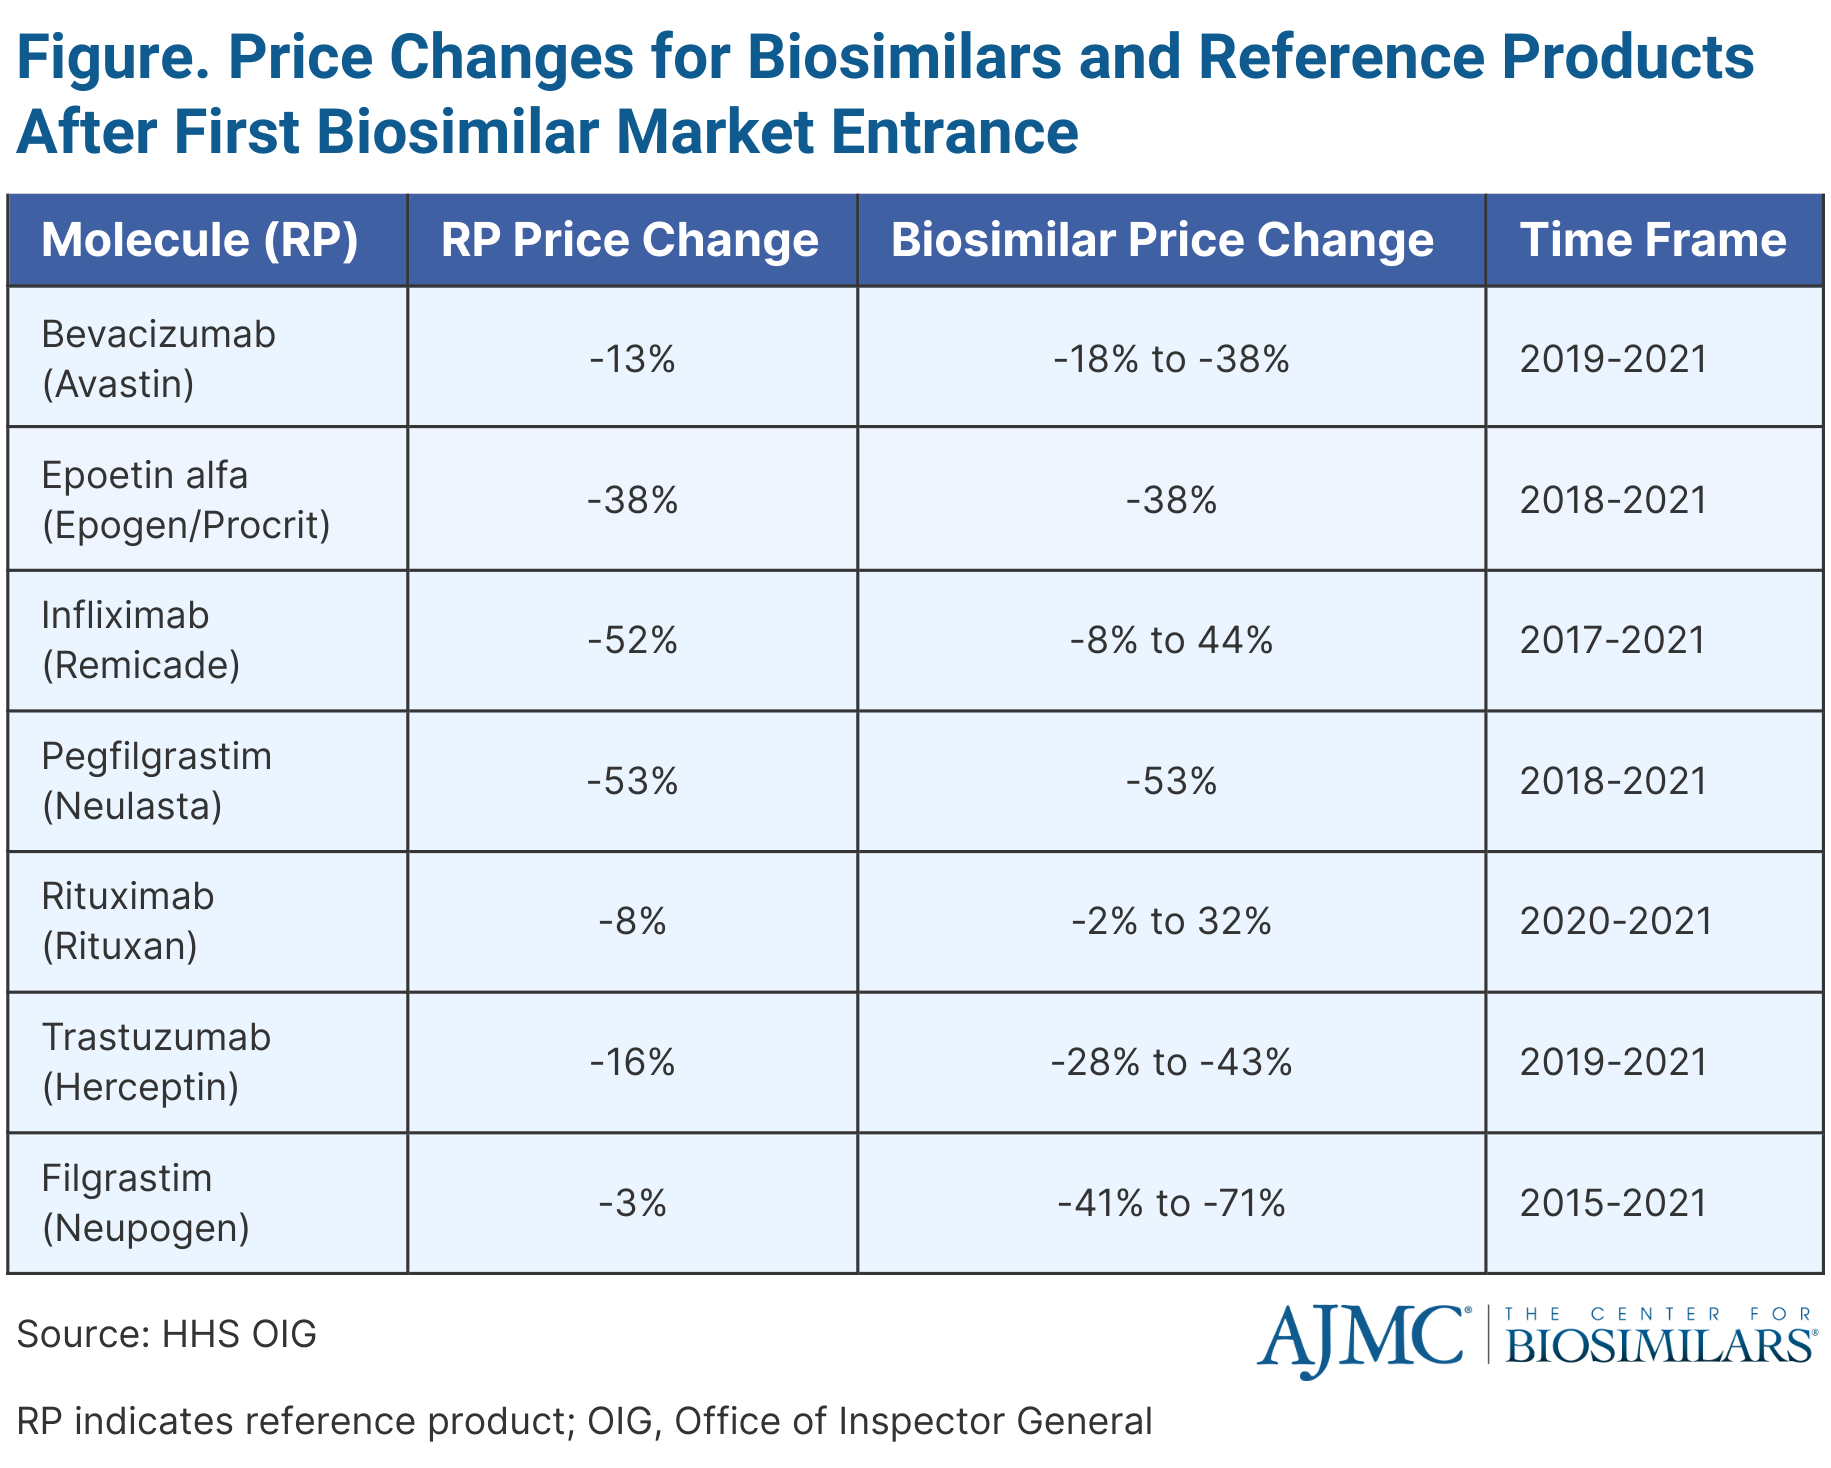 Figure. Price Changes for Biosimilars and Reference Products After First Biosimilar Market Entrance